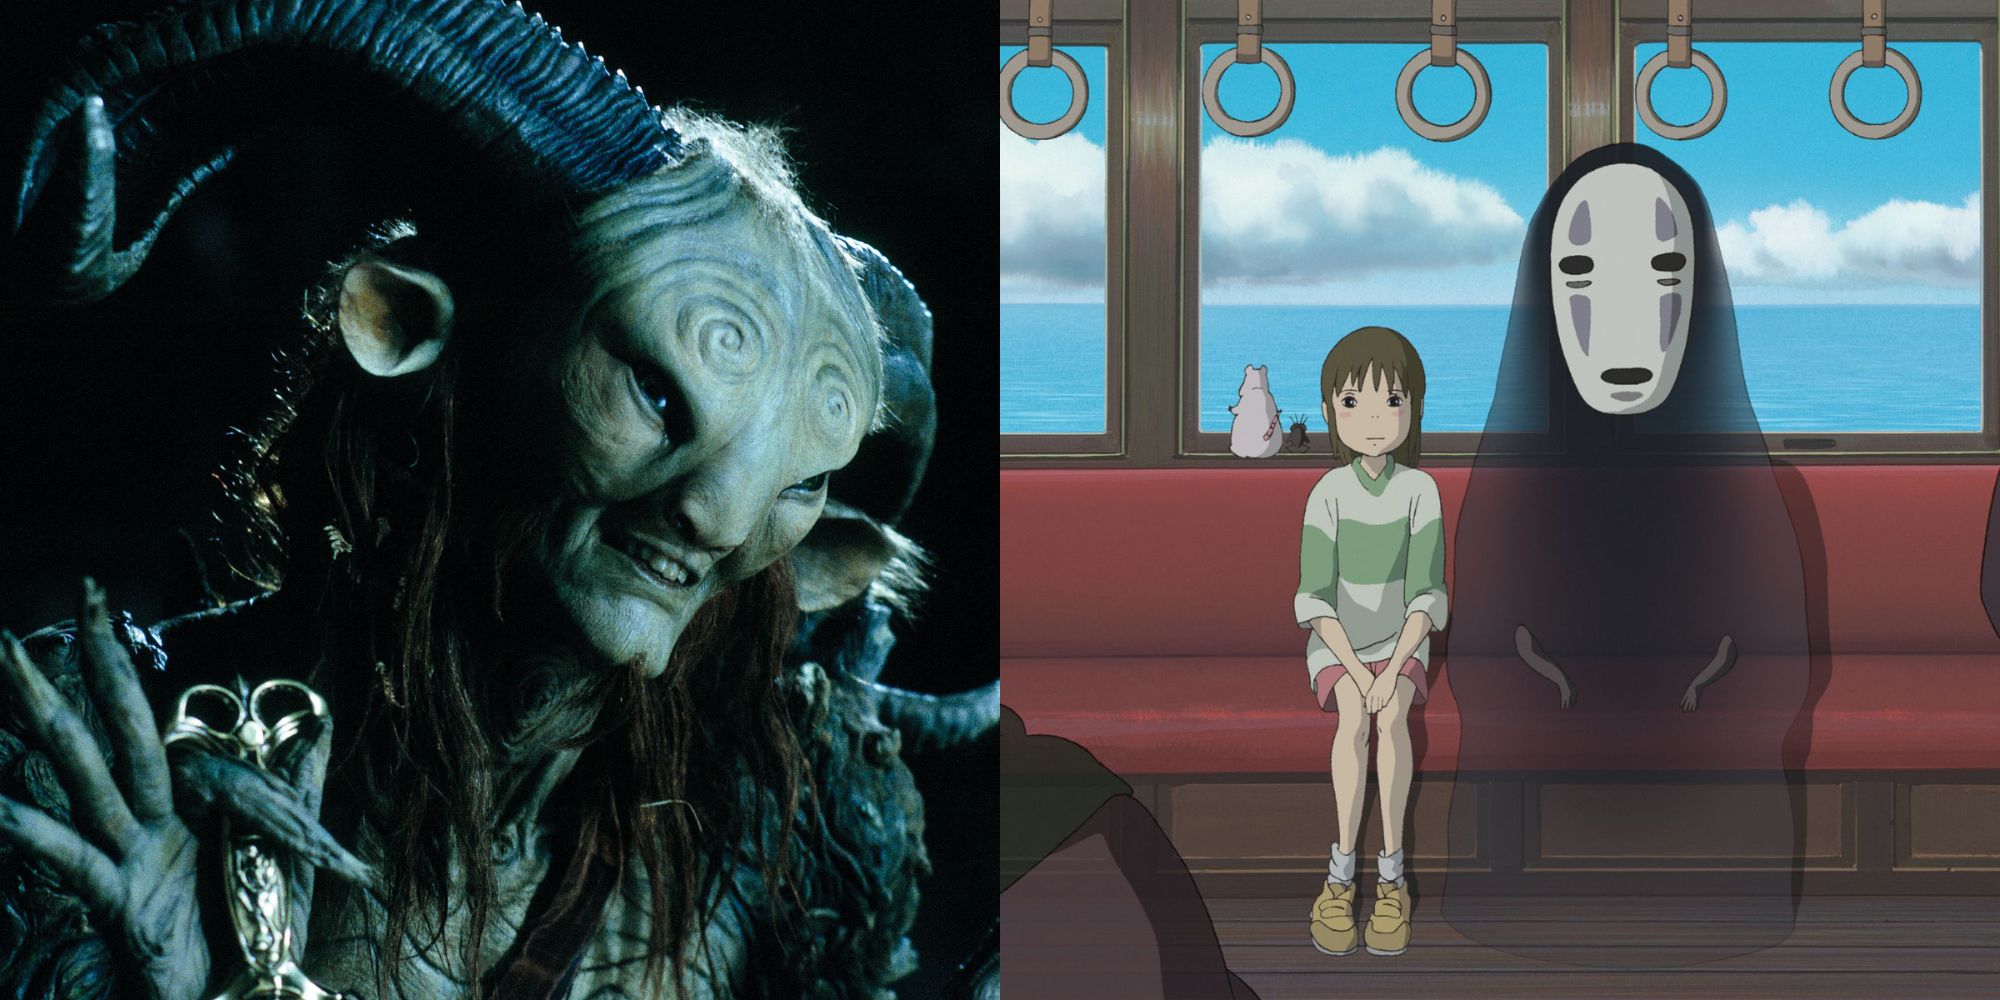 SPlit image showing the Faun in Pan's Labyrinth and Chihiro in Spirited Away.